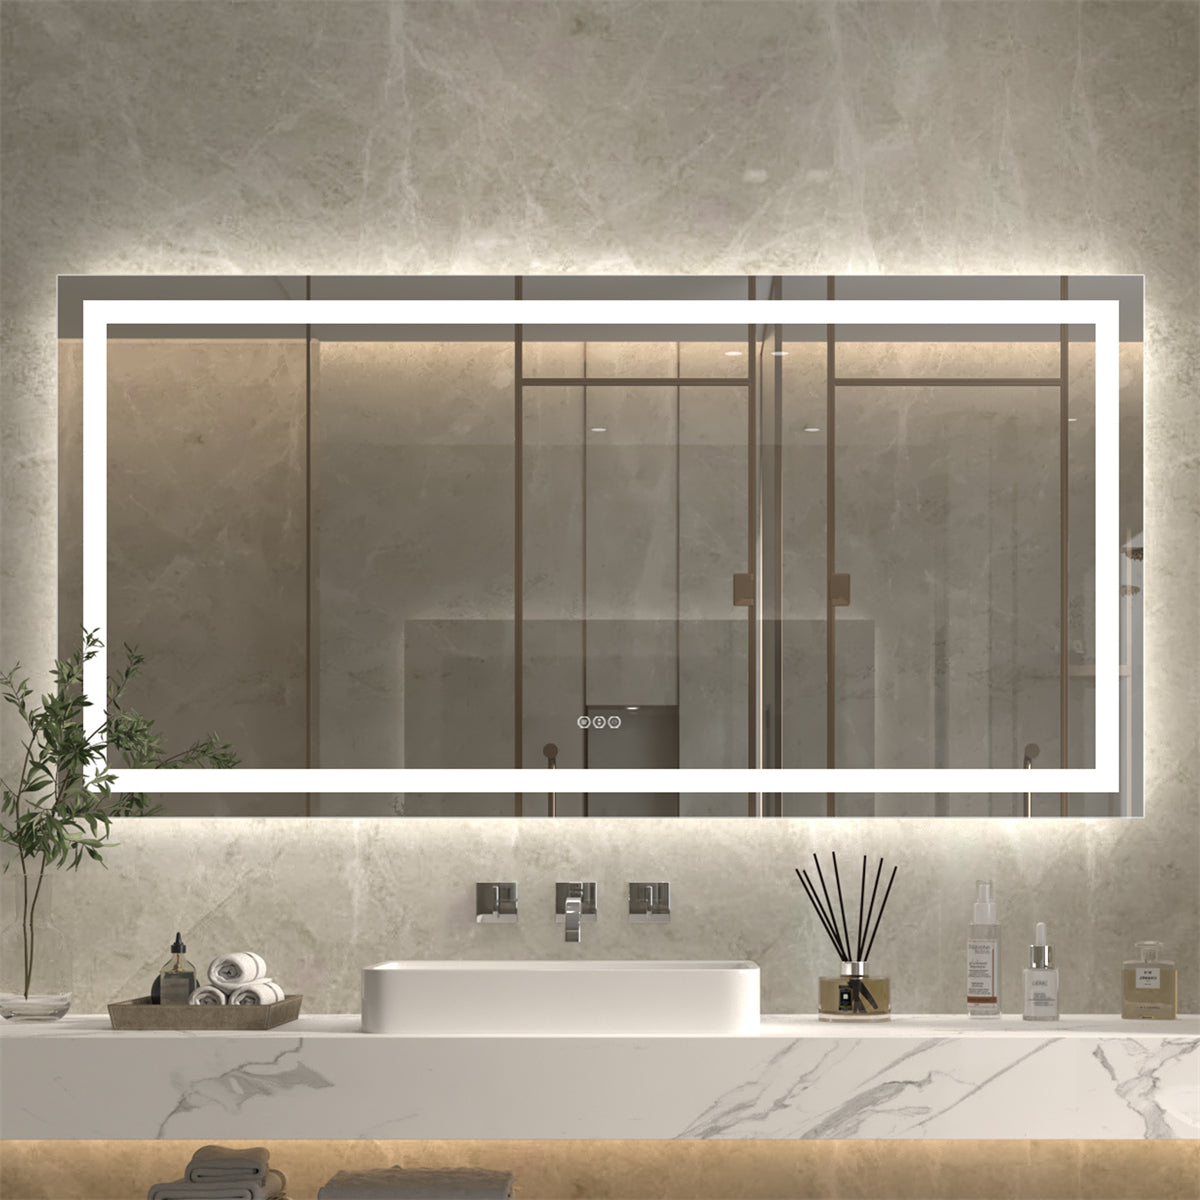 ExBriteUSA ExBrite 72" W x 36" H LED Bathroom Large Light Led Mirror,Anti Fog,Dimmable,Dual Lighting Mode,Tempered Glass